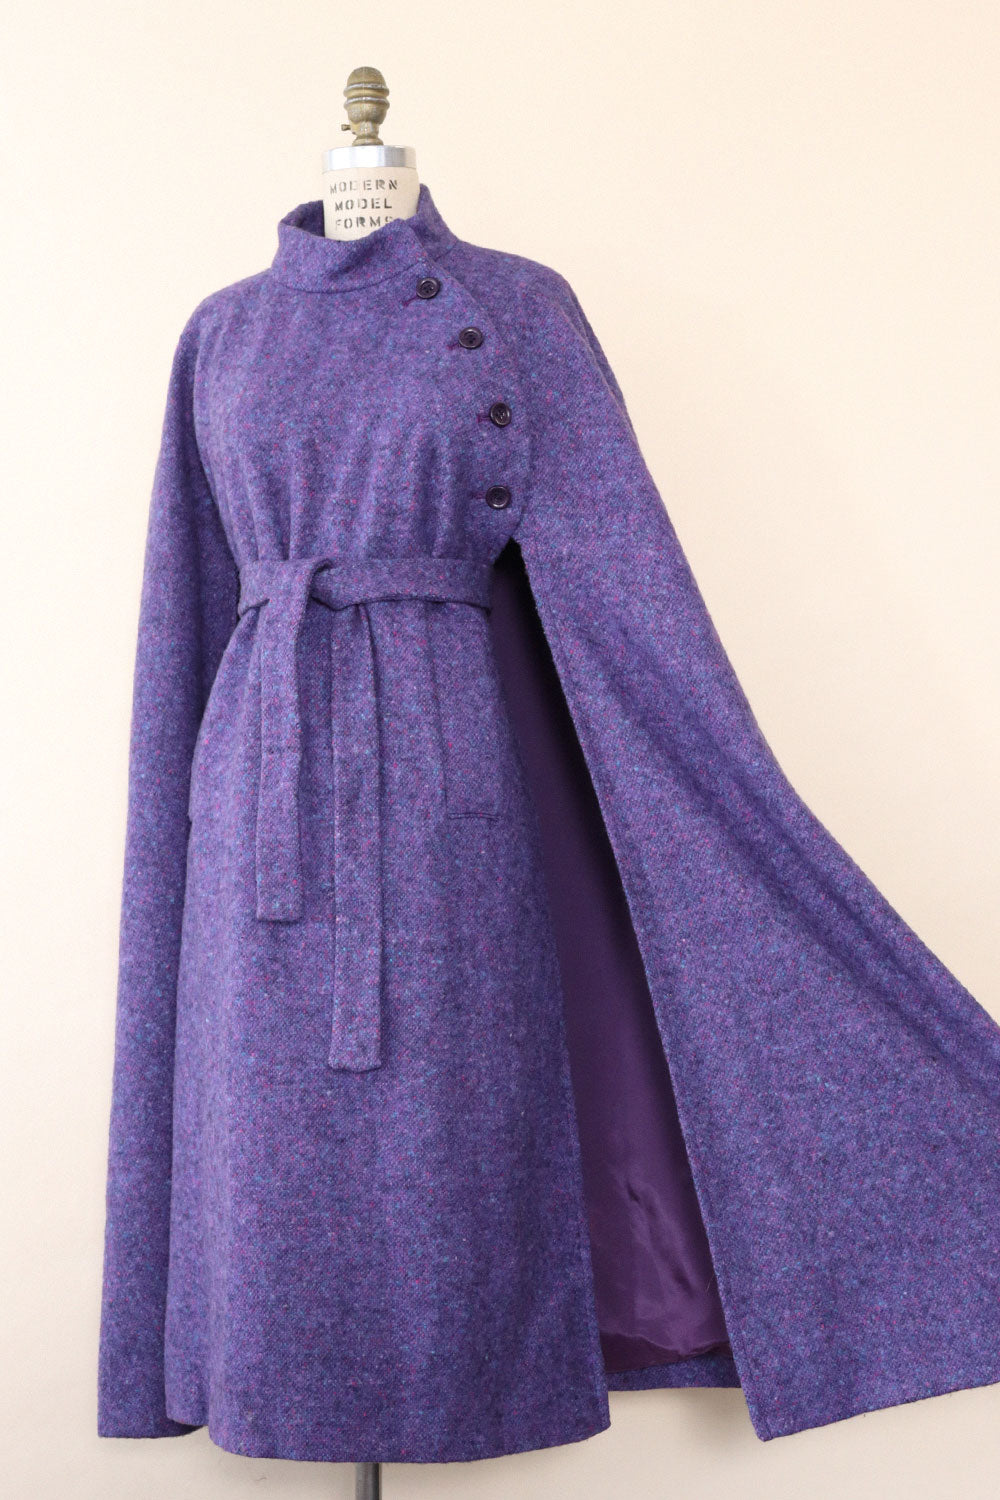 New Old World Hooded Trench Cape – OMNIA